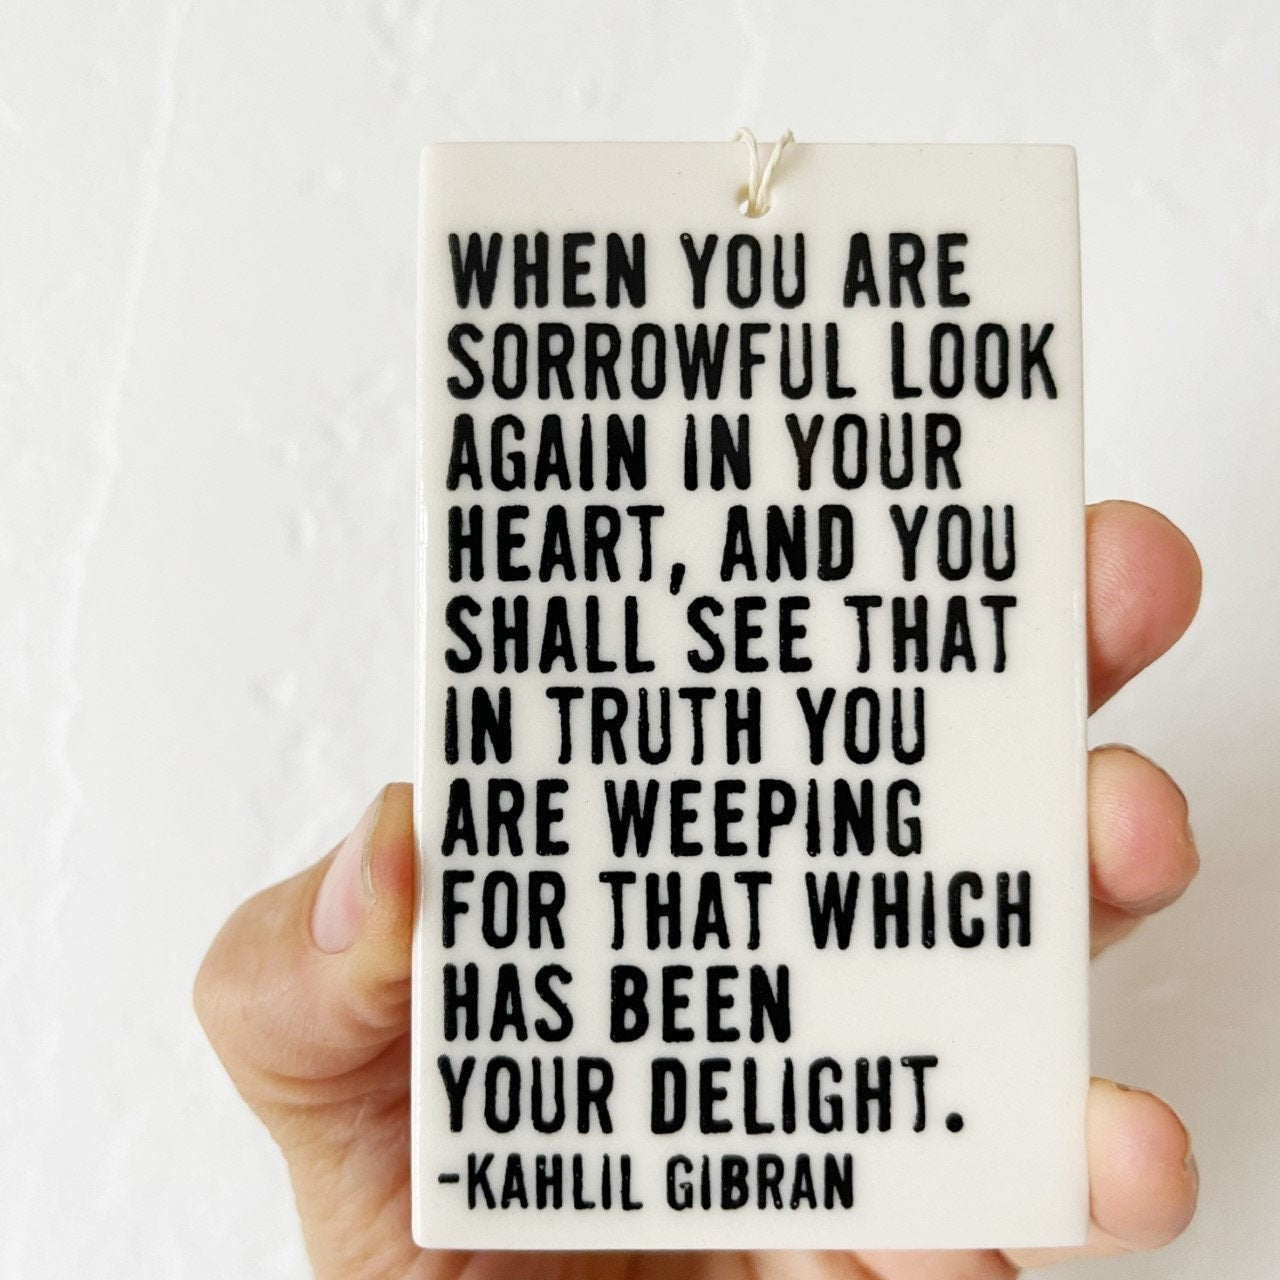 gibran quote | khalil gibran quote wall hanging | kahlil gibran quote | bereavement | ceramic wall tag | meaningful gif | the prophet